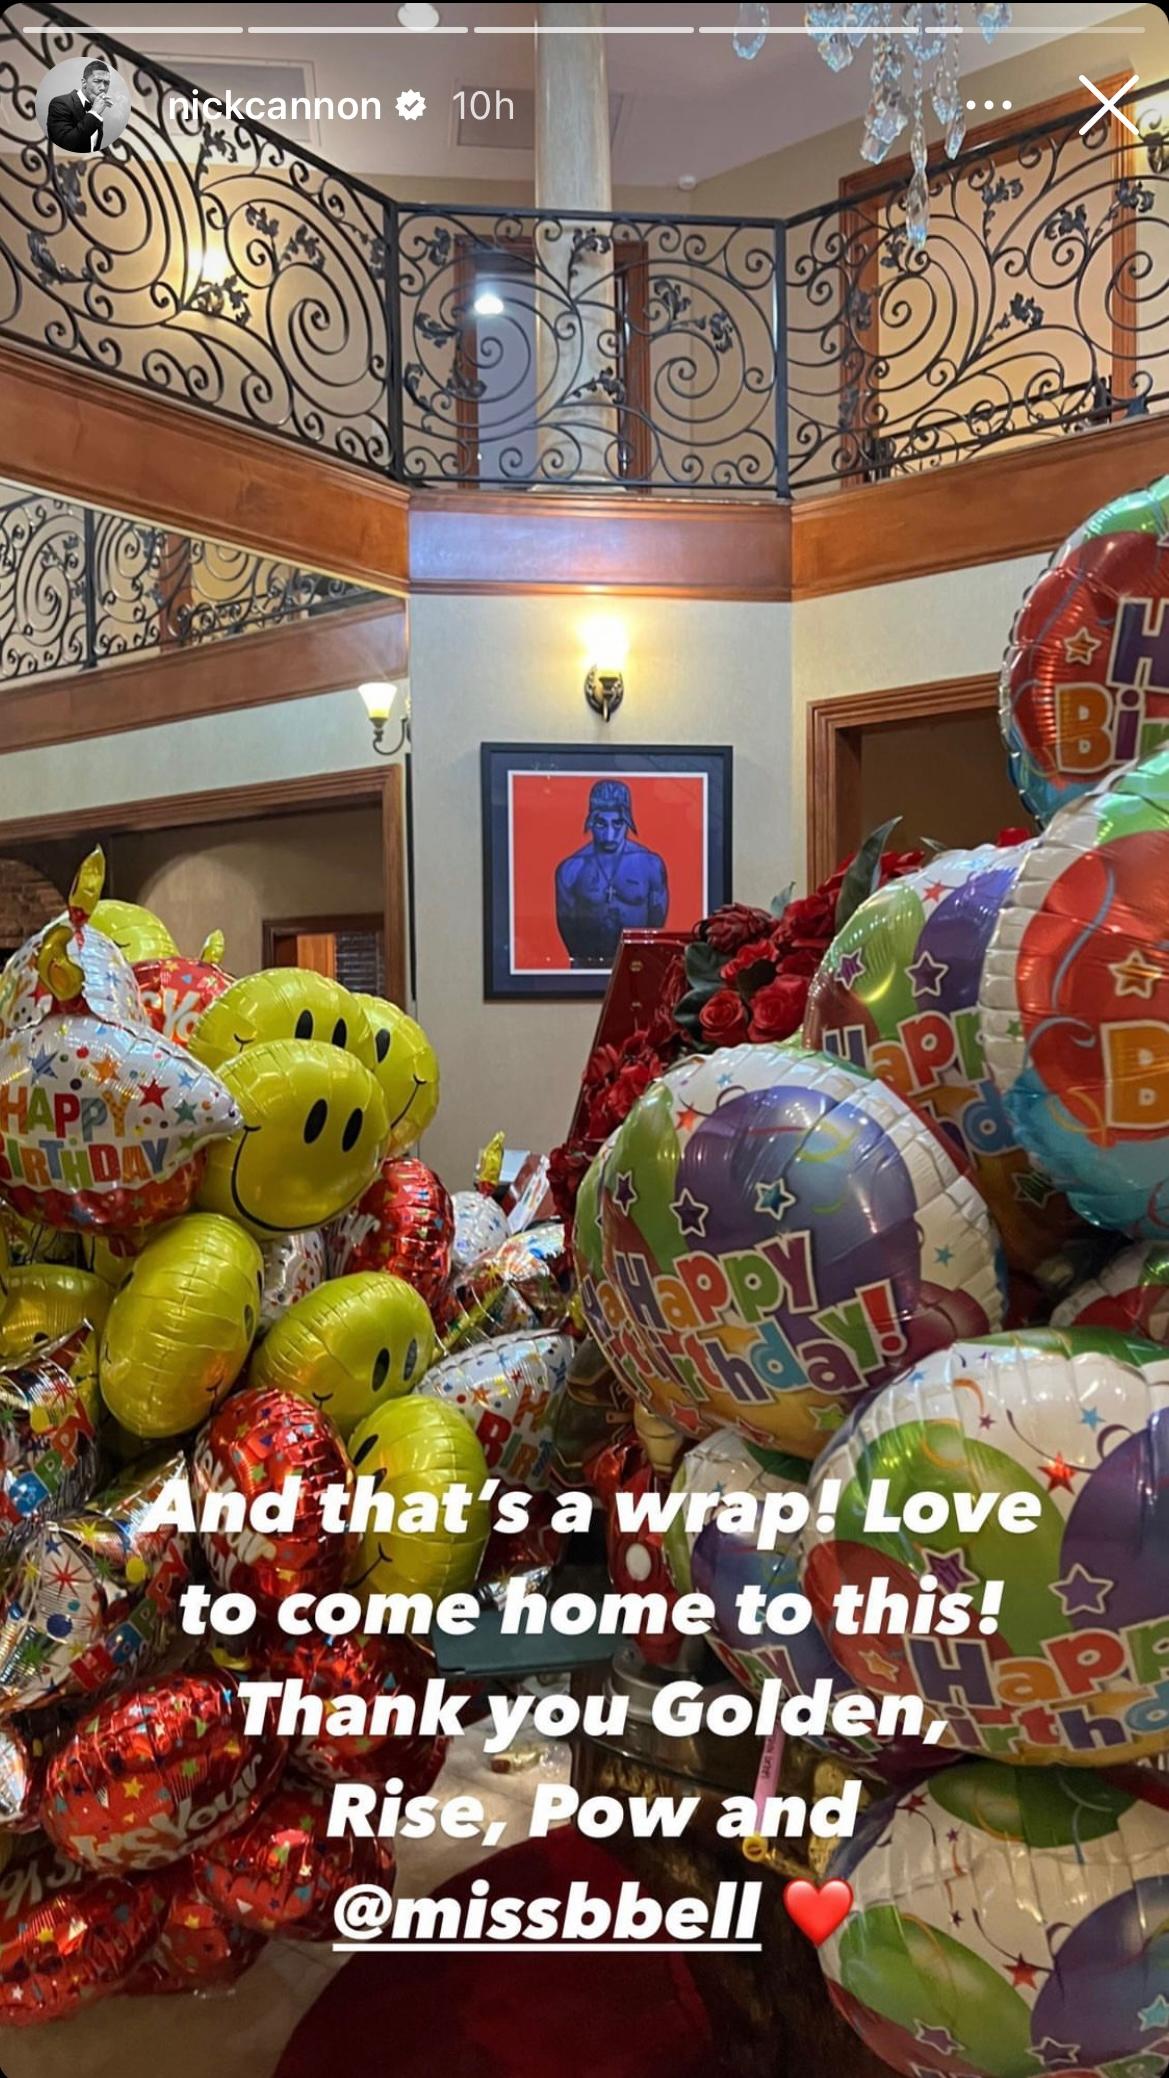 Nick Cannon shows off balloon gifts received on his 42nd birthday